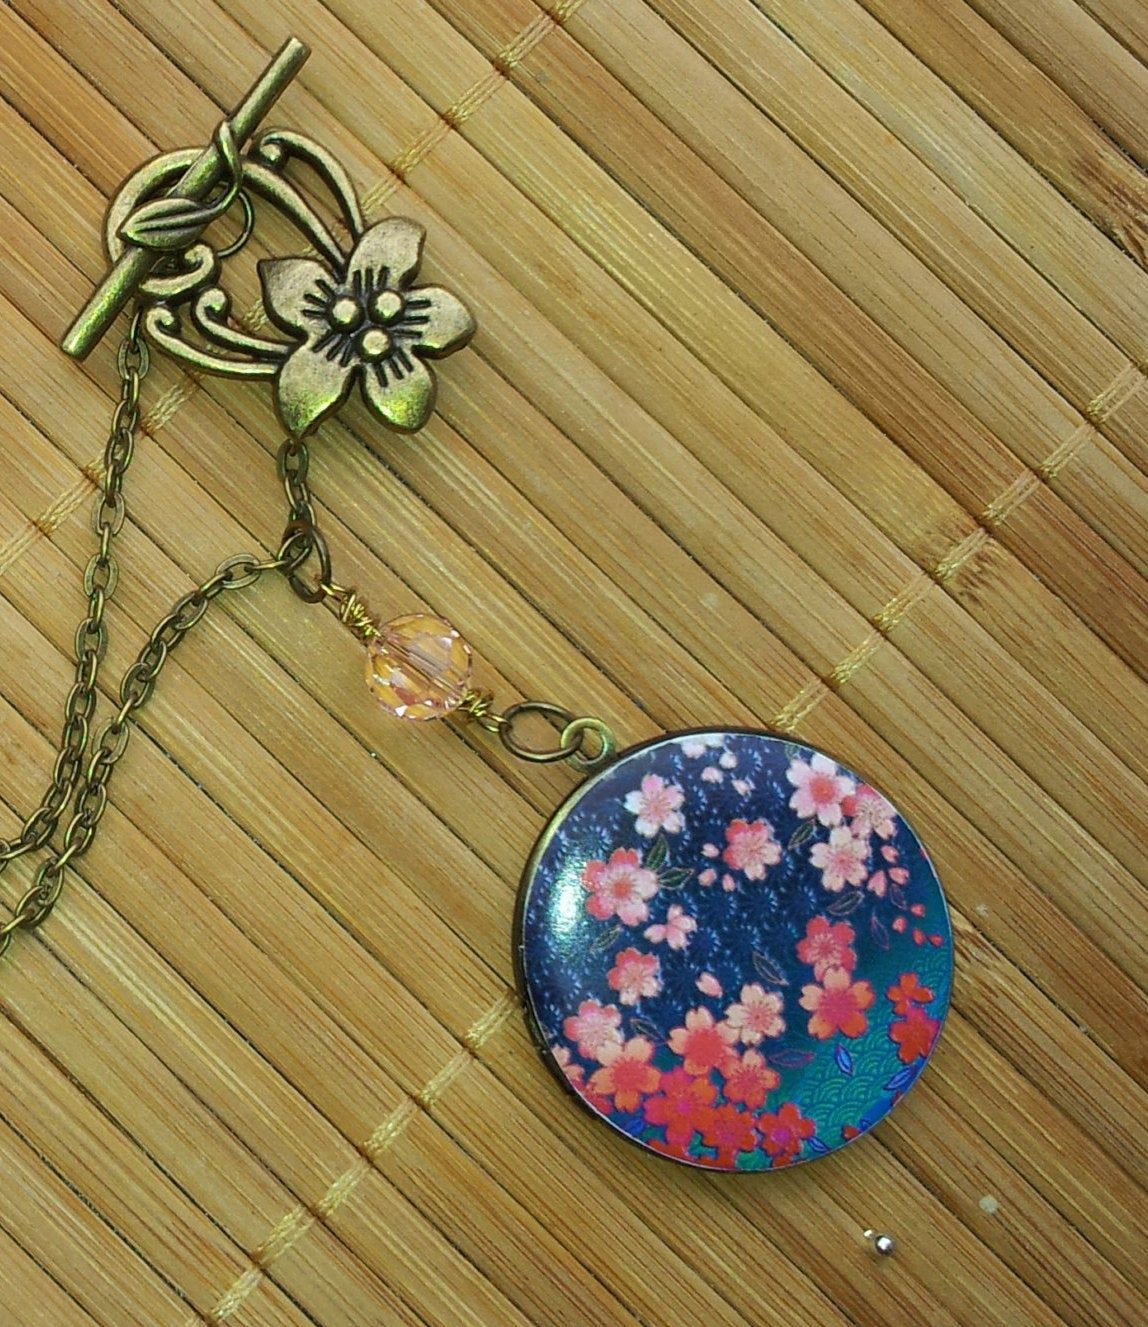 Cherry Blossom Sakura Round Bronze Art Locket Necklace – Plum Flowers  Toggle Clasp Blue Pink Mothers Day Christmas Grandmother Gift Floral Intended For 2019 Pink Cherry Blossom Flower Locket Element Necklaces (View 5 of 25)